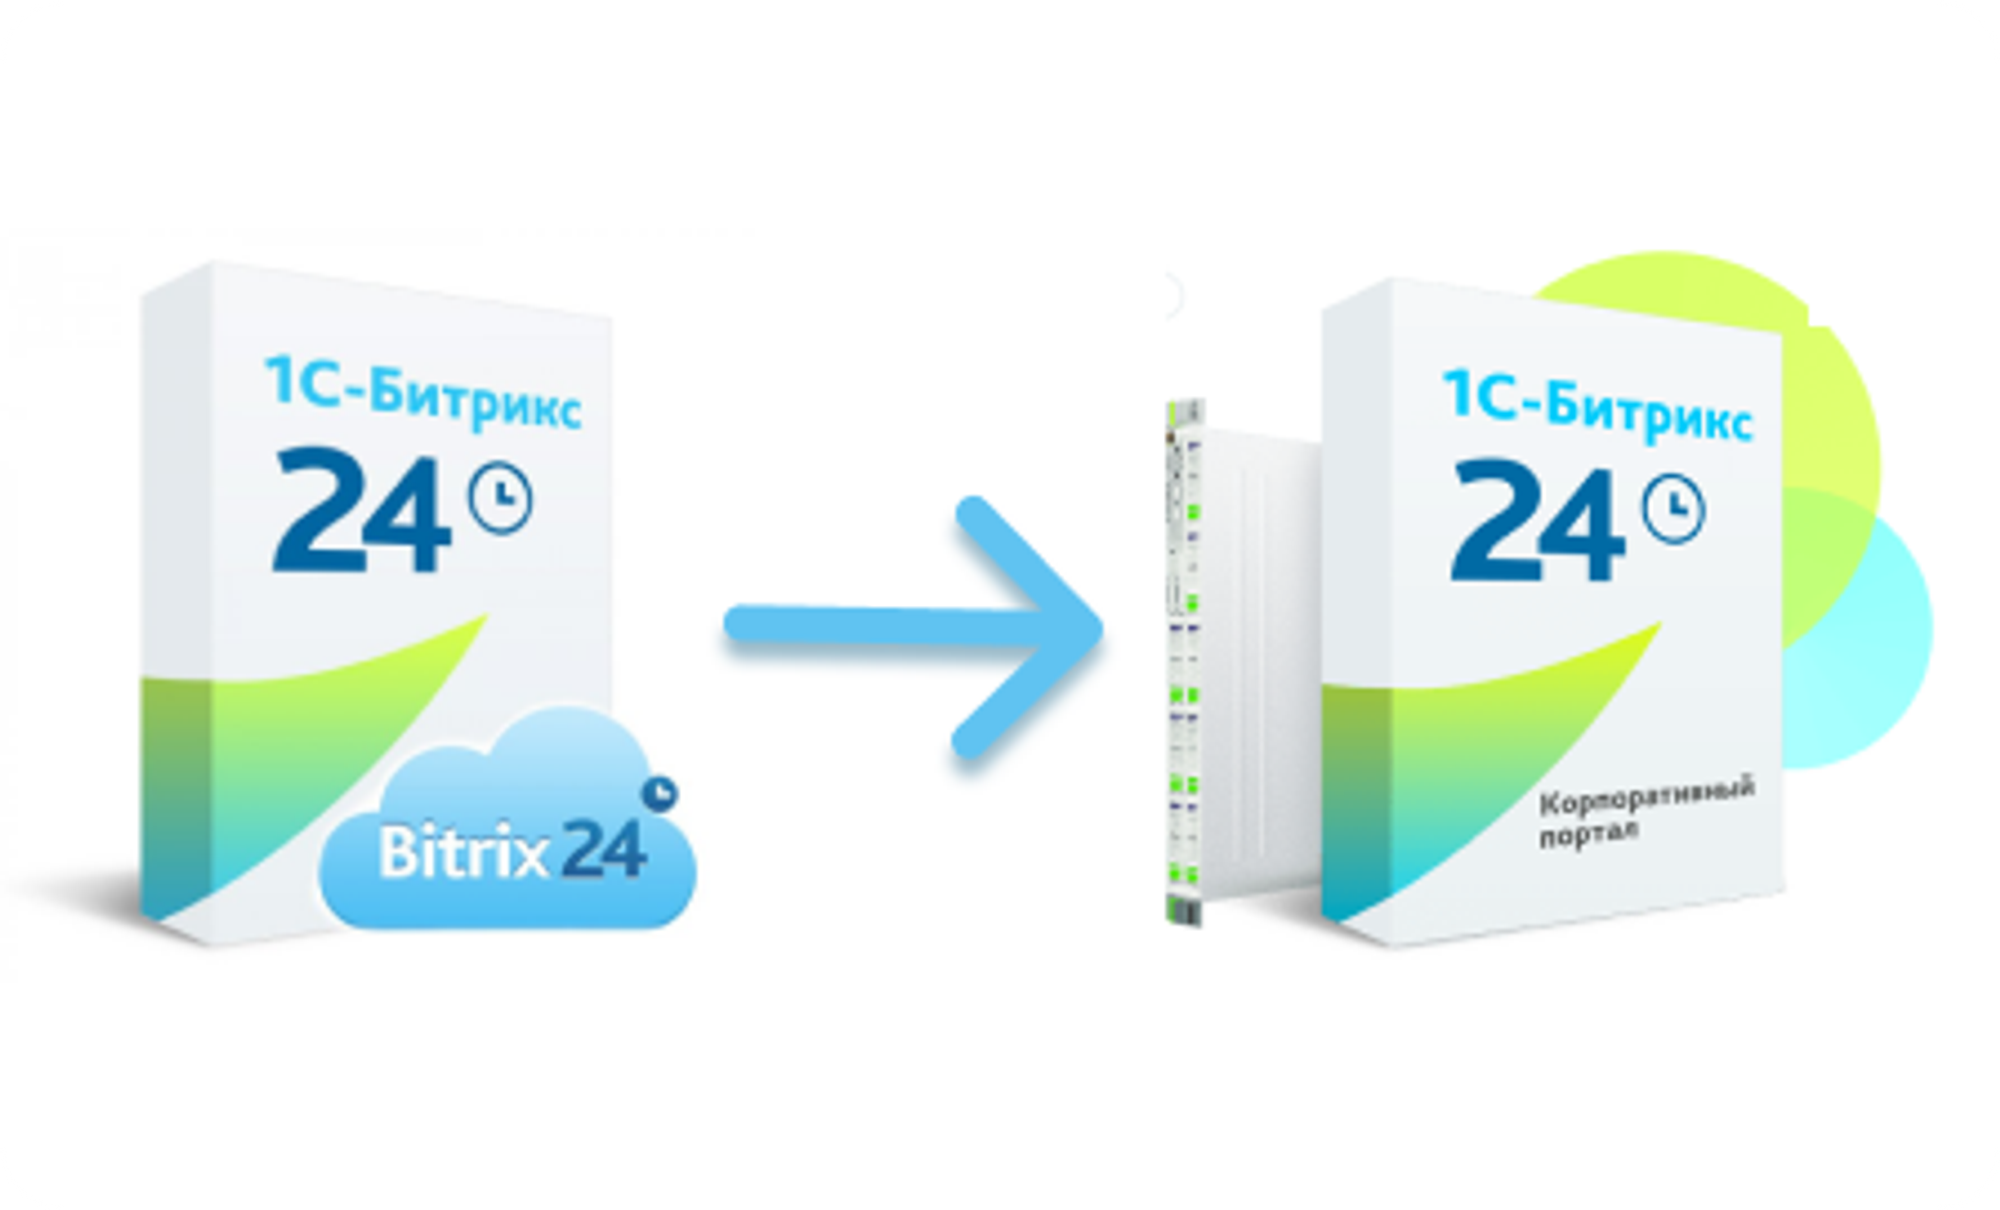 Transition between cloud and boxed versions of Bitrix24